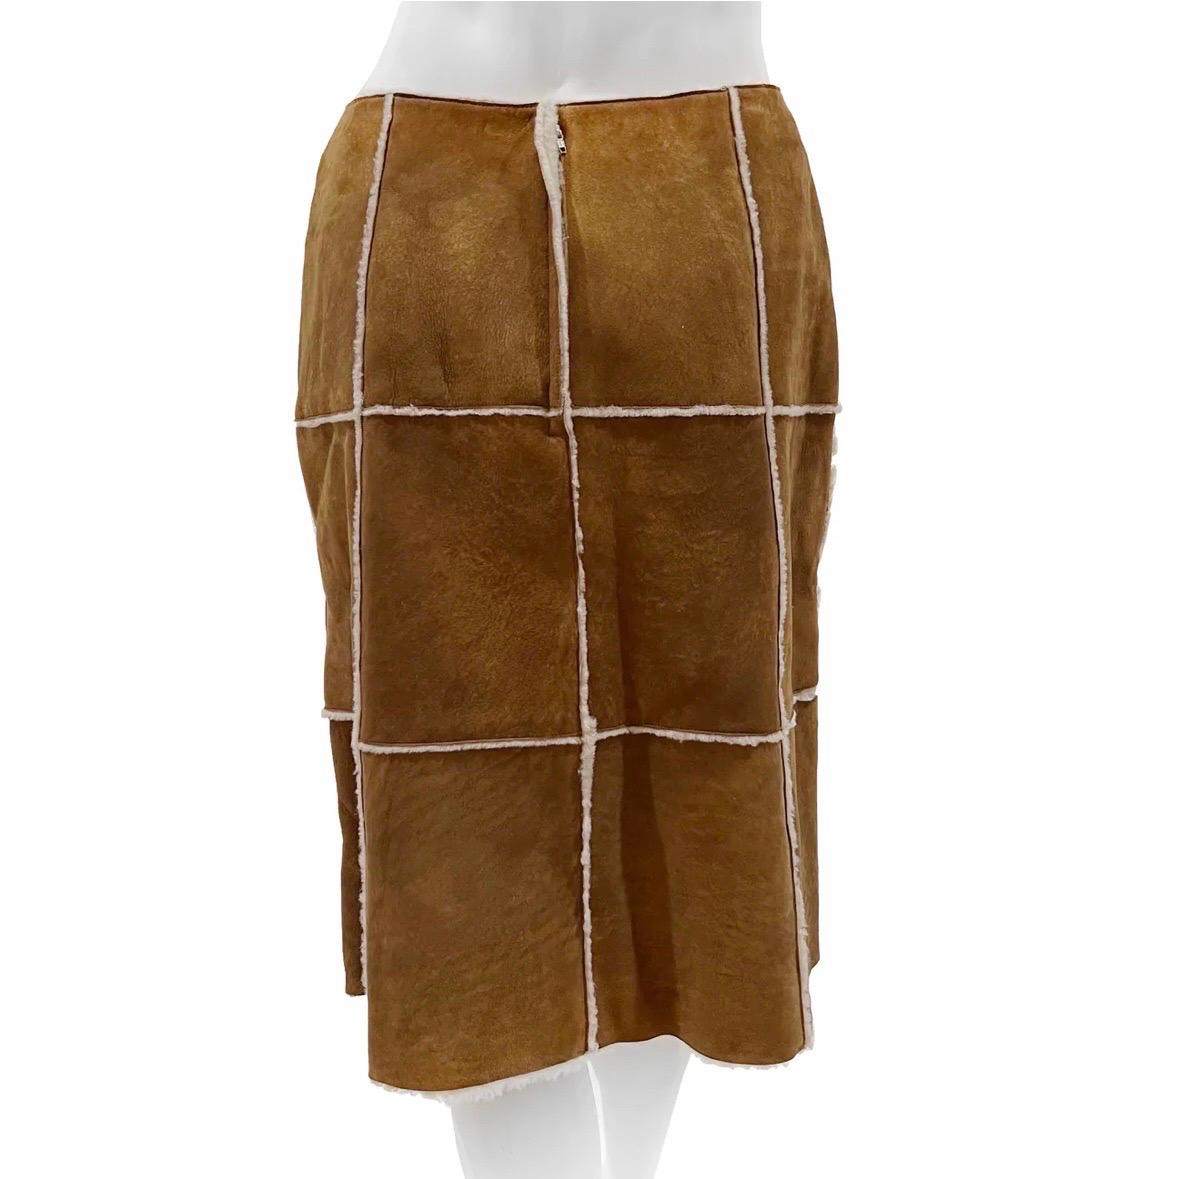 Vintage Wool Shearling Skirt by Chanel
Fall / Winter 2000
Made in France
Tan/cream 
Shearling detail
Mid length skirt
Back zip closure
Fabric Composition; 100% Lamb wool
Excellent  Condition; Preloved with little to no visible wear. (see photos)